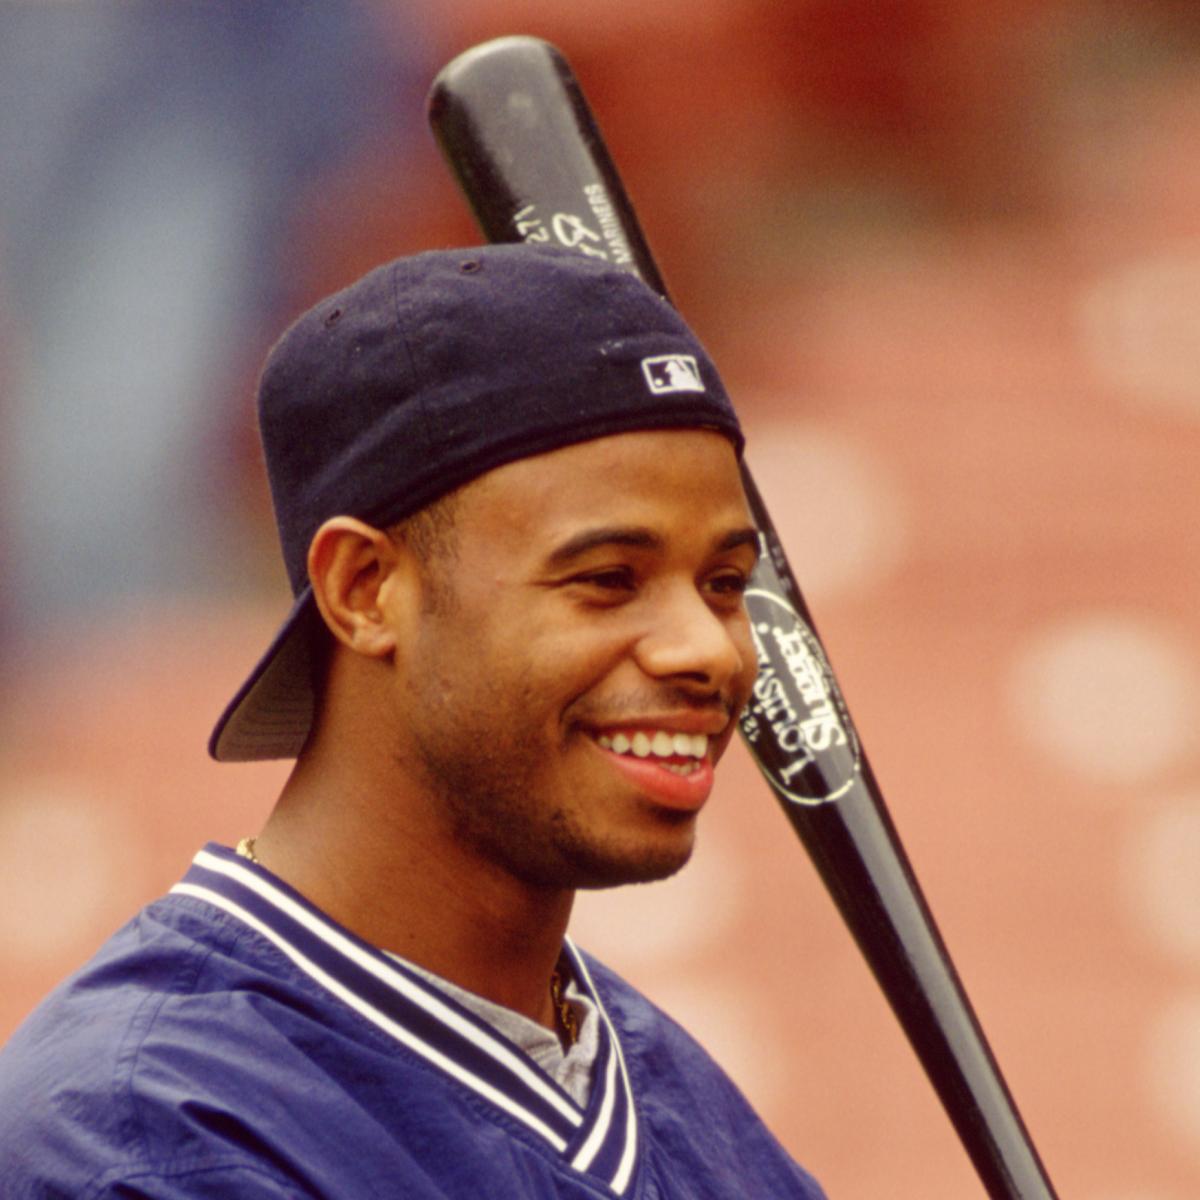 How '90s Icon Ken Griffey Jr. Transcended MLB to Become Pop